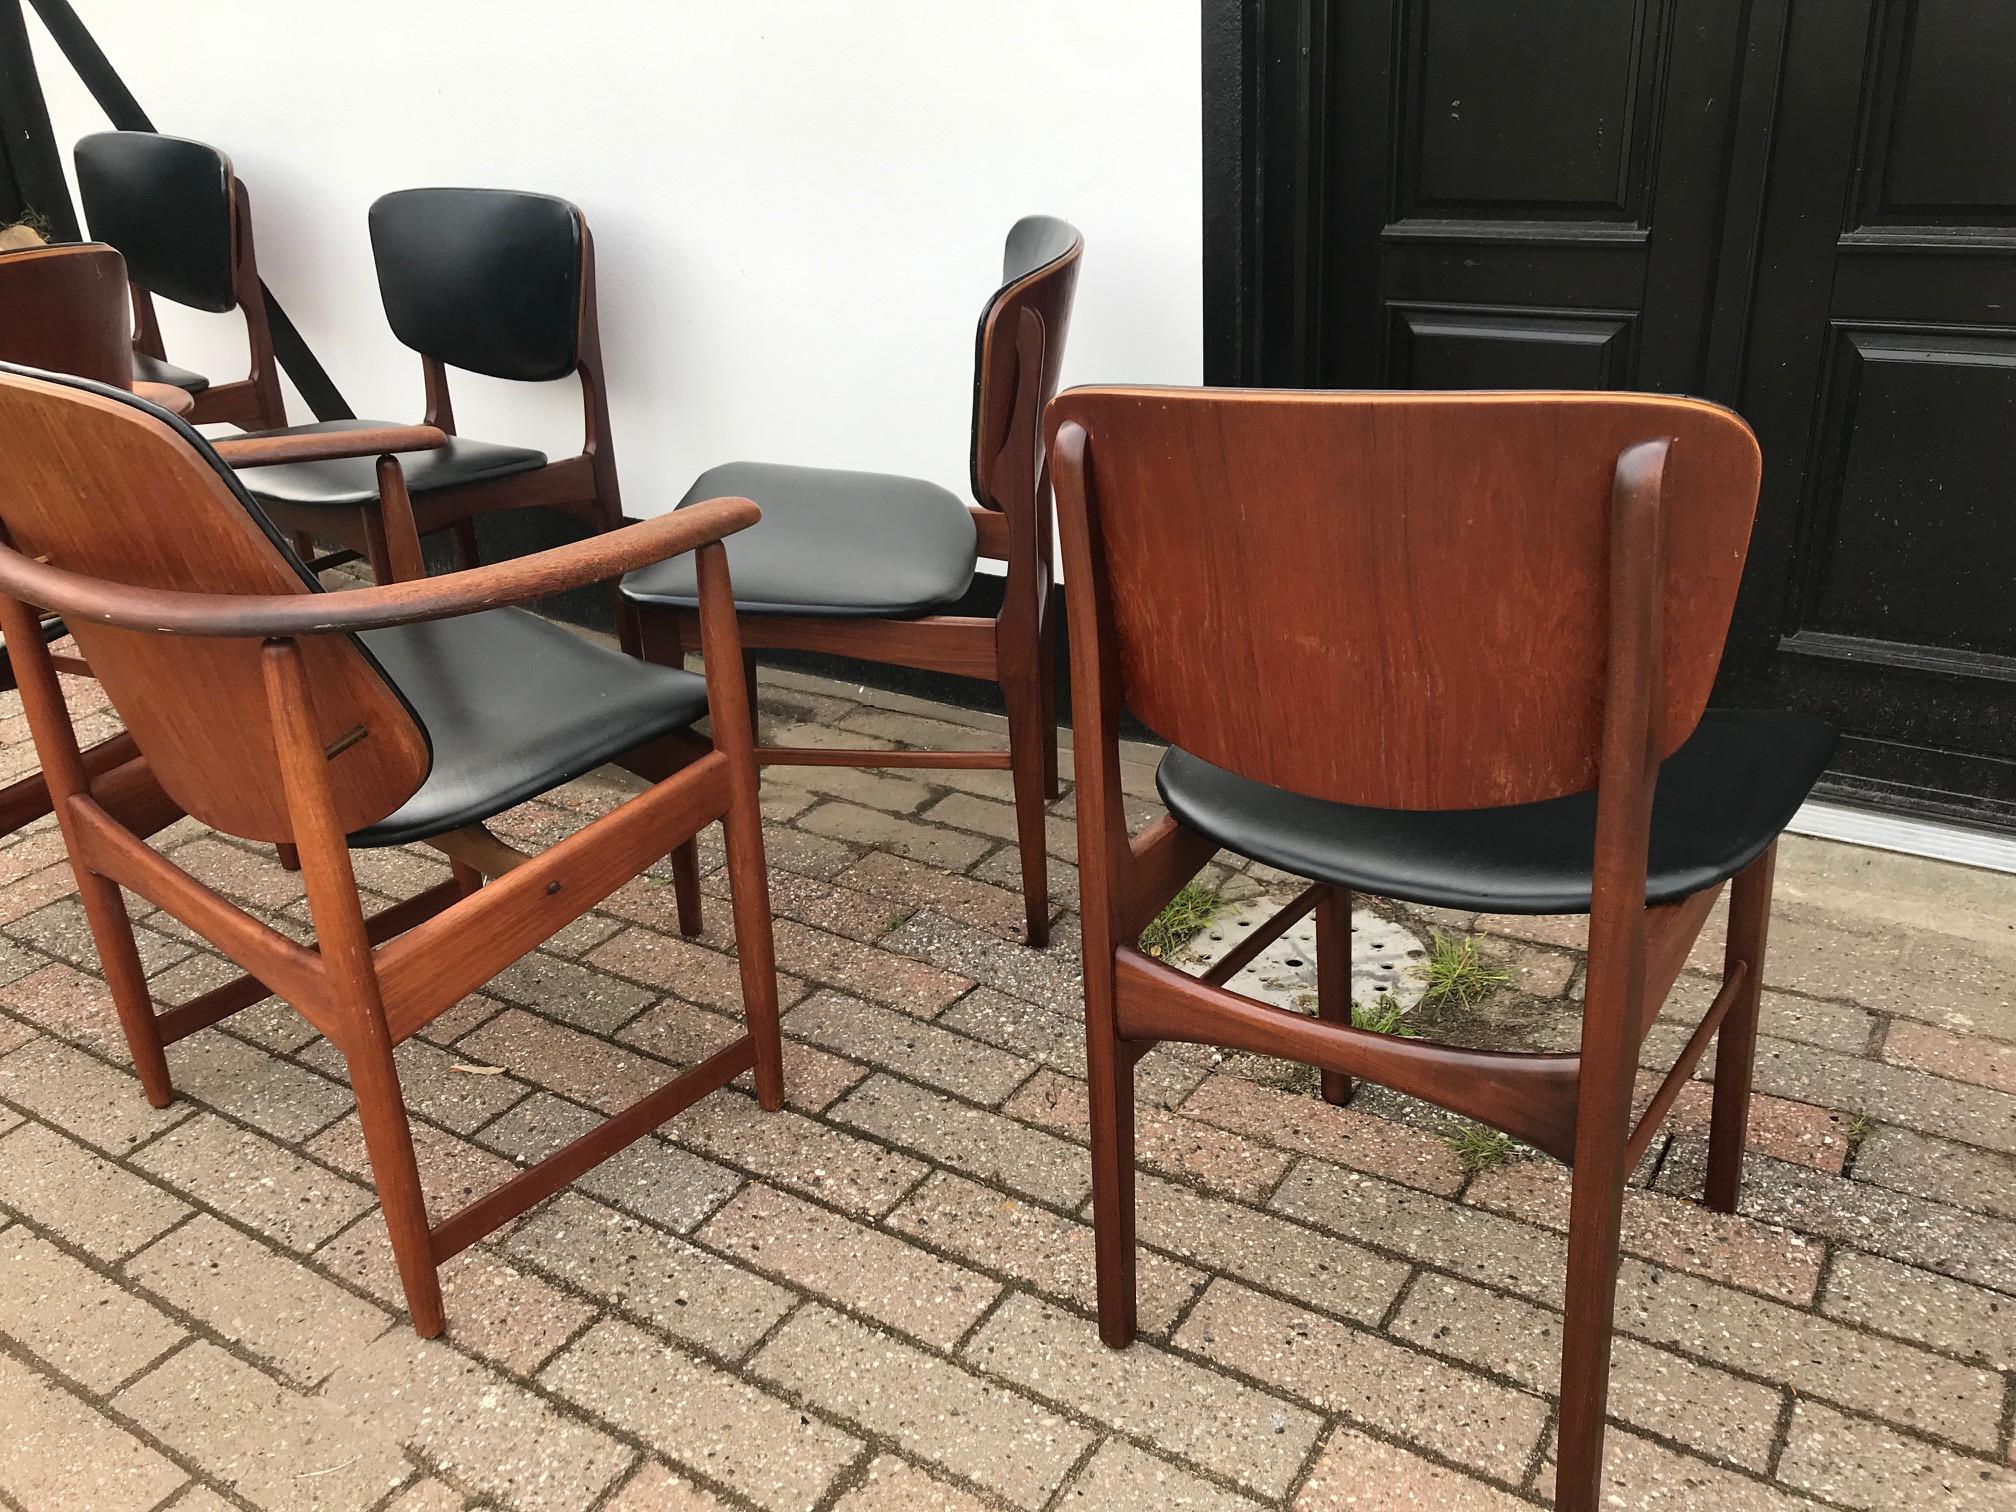 Arne Hovmand Olsen King and Queen Dining Chairs in Teak, Jutex 1950s, Set of 6 For Sale 1